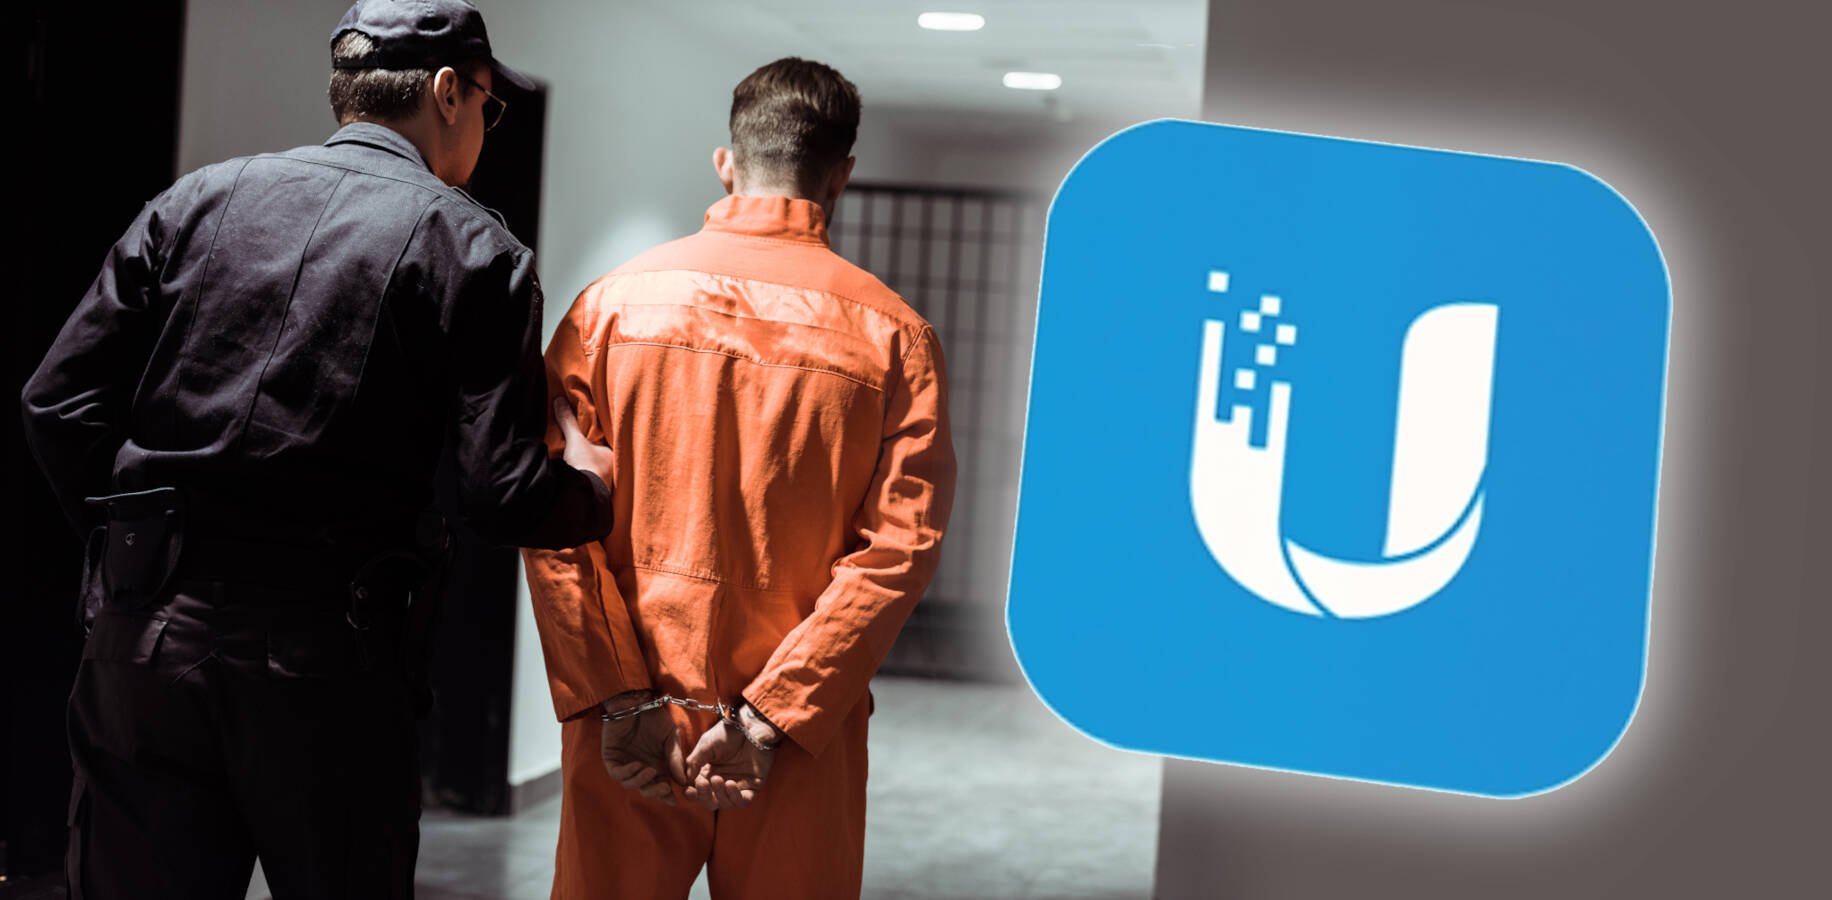 Former Ubiquiti employee gets 6 years in jail for stealing confidential data and extorting company